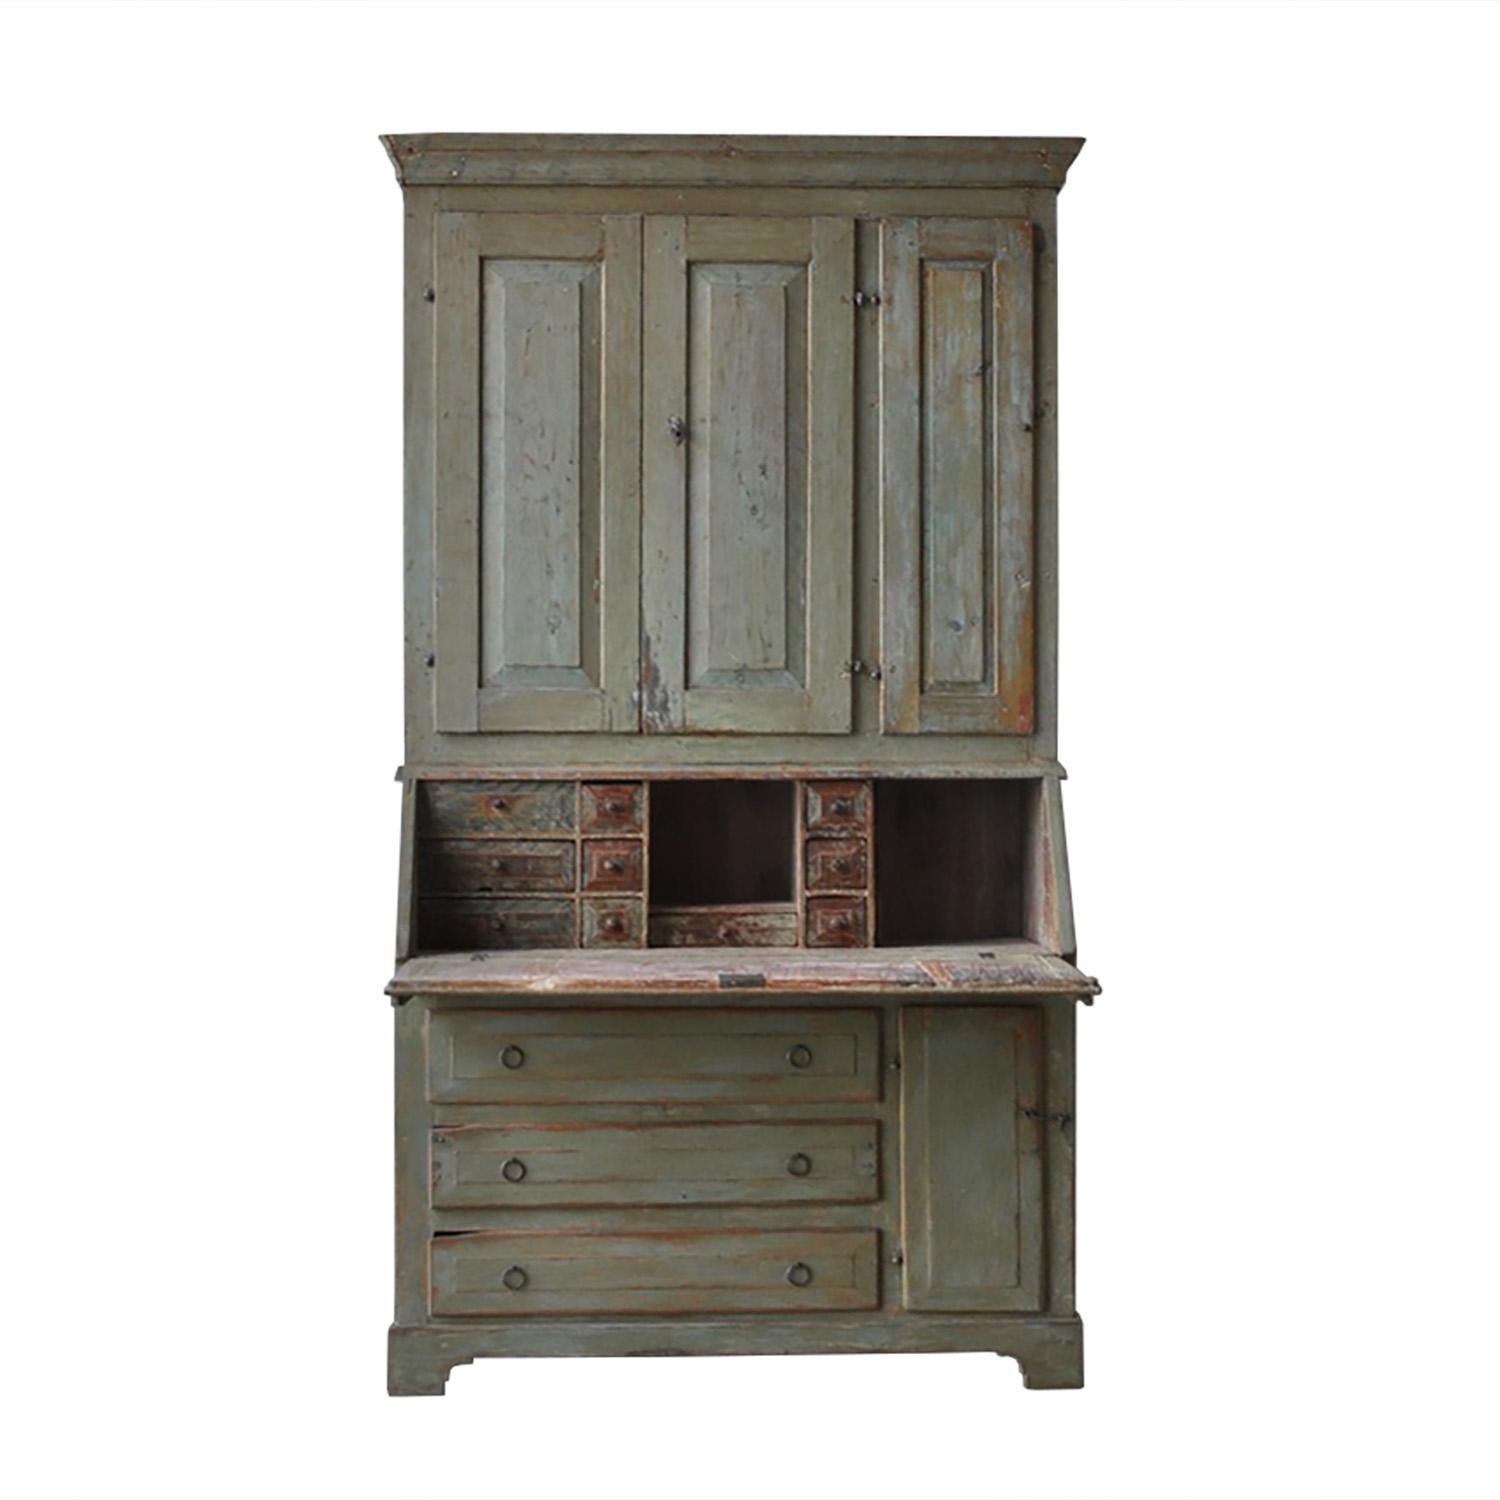 Original Paint Swedish Secretary In Good Condition For Sale In Tetbury, Gloucestershire